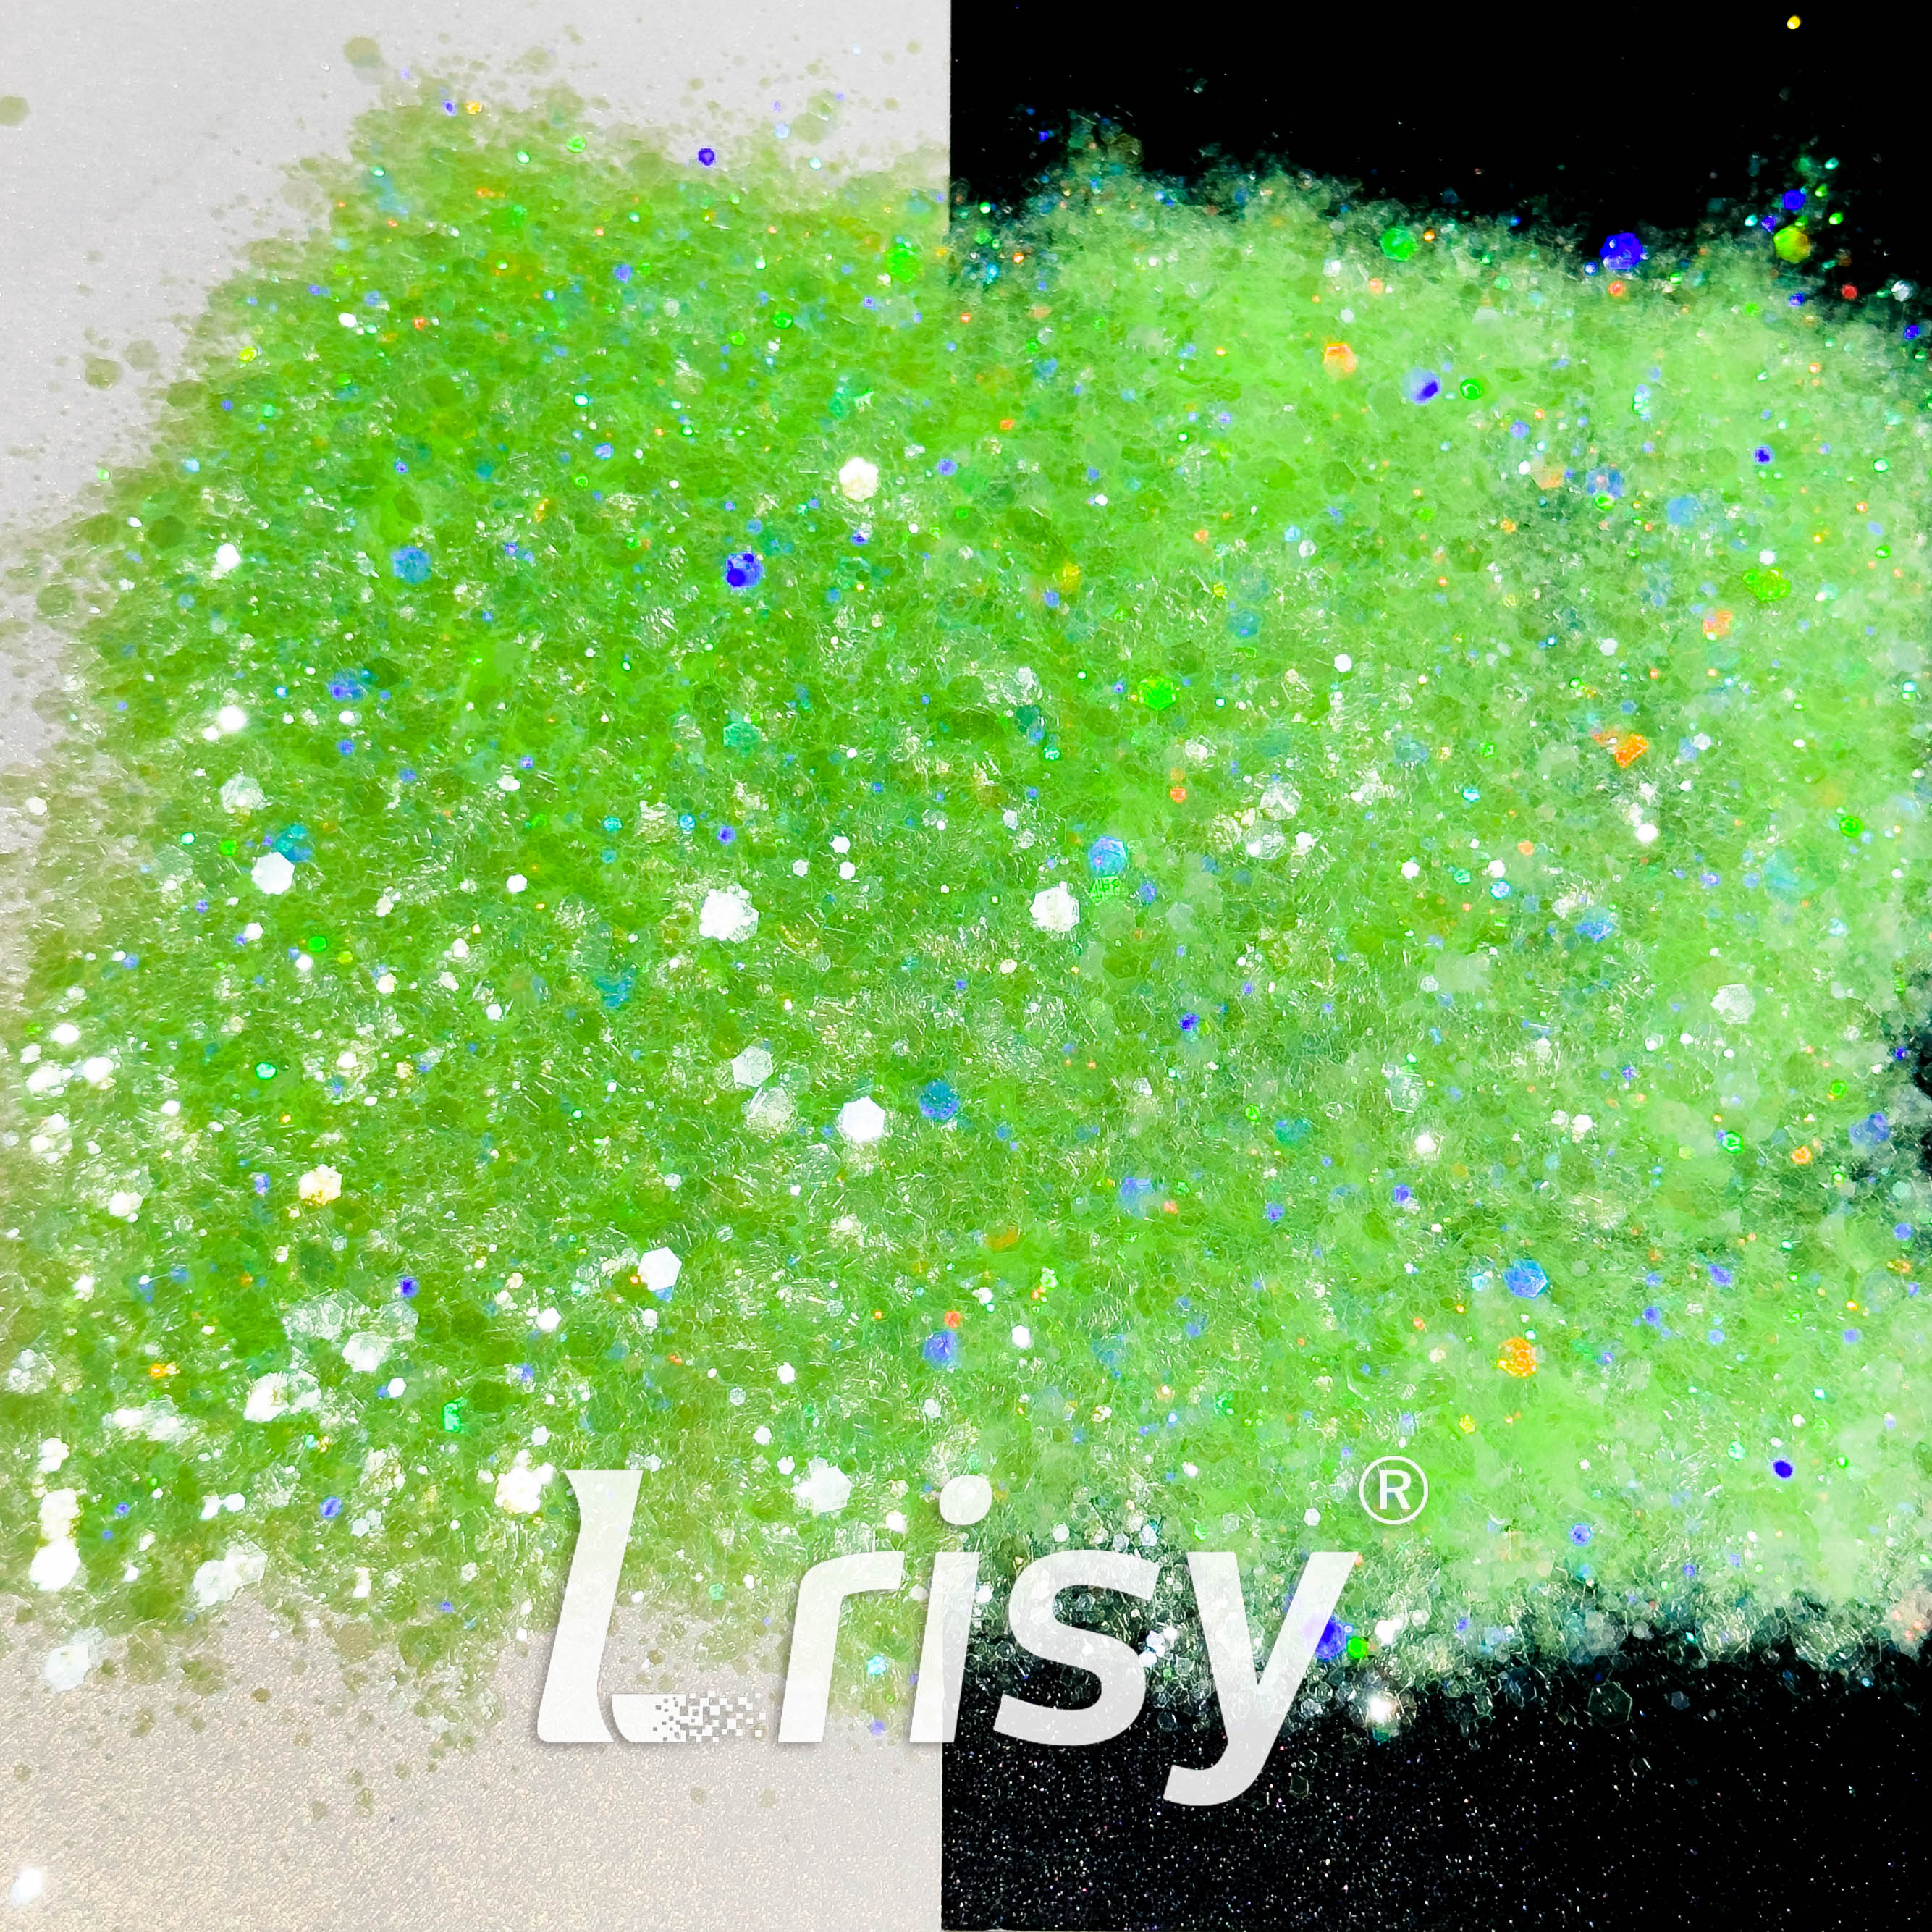 General Mixed Translucent Holographic Green Glitter Hexagon Shaped WT02